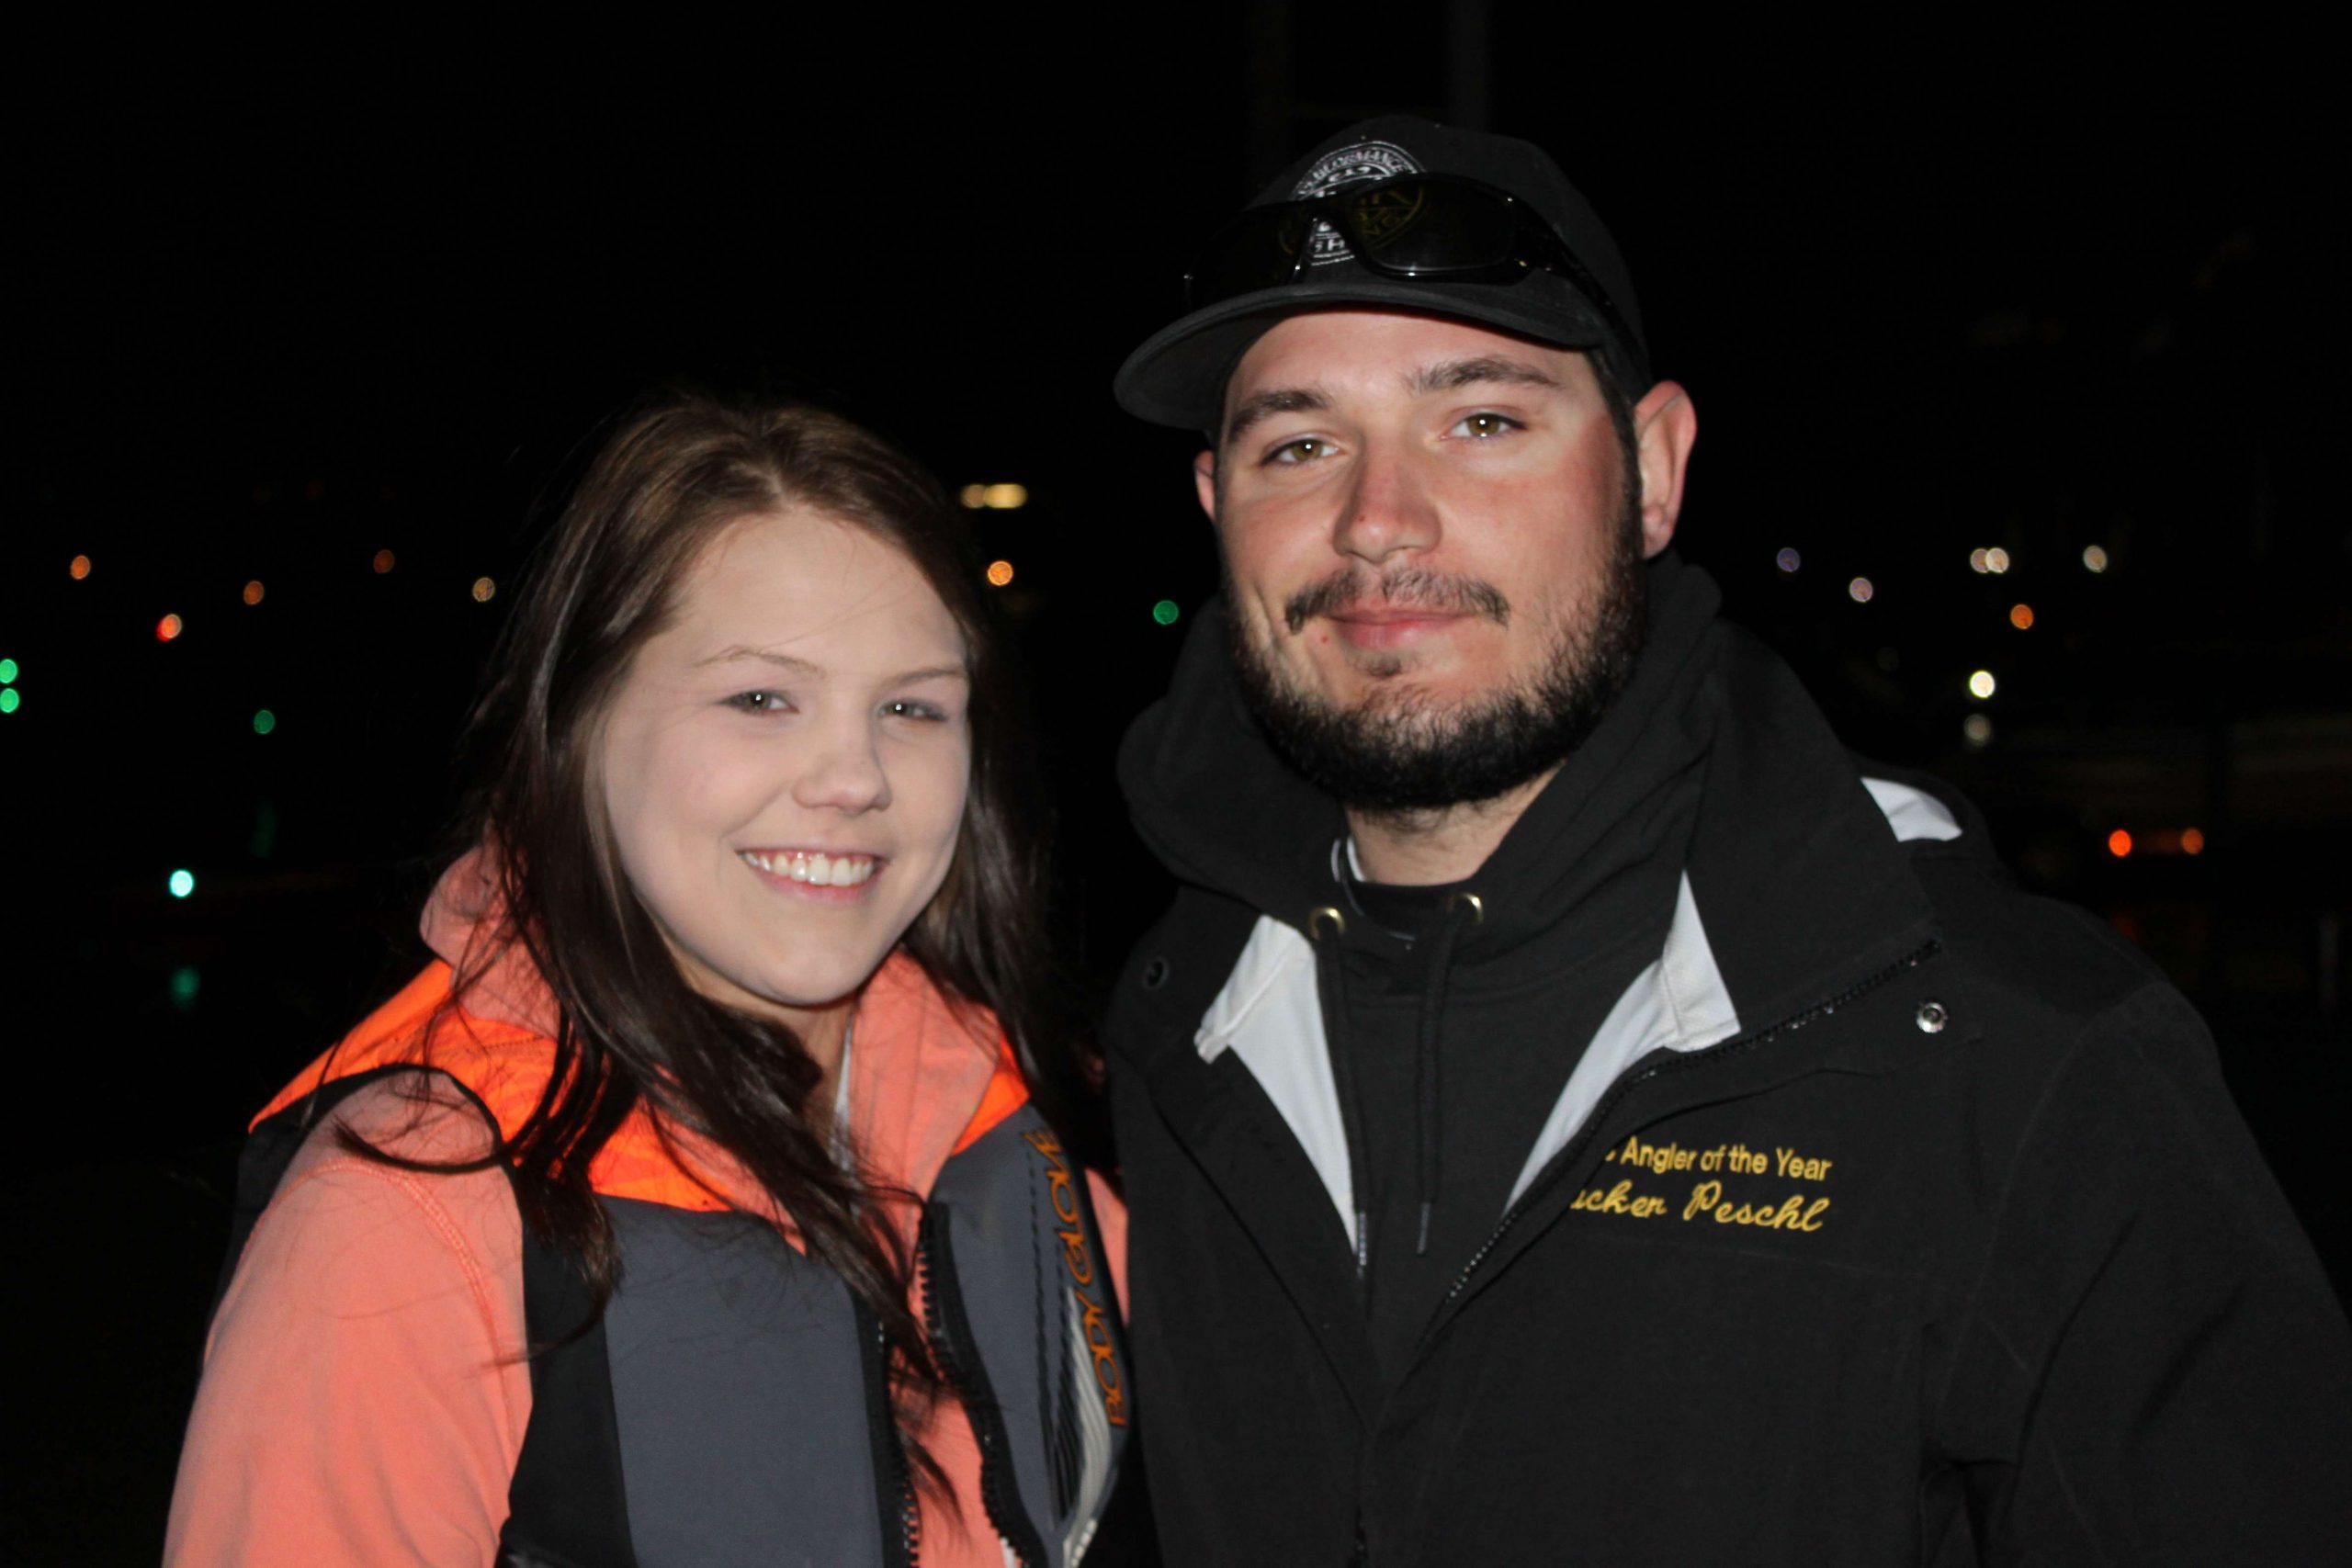 Some anglers, such as South Dakota non-boater Tucker Peschl, had company as he waited at the backdown for his fishing partner to roll through the line. Peschl's girlfriend Carrie Wiegen was happy to accompany him to the shores of Toledo Bend, some 16 hours (one way) from home.